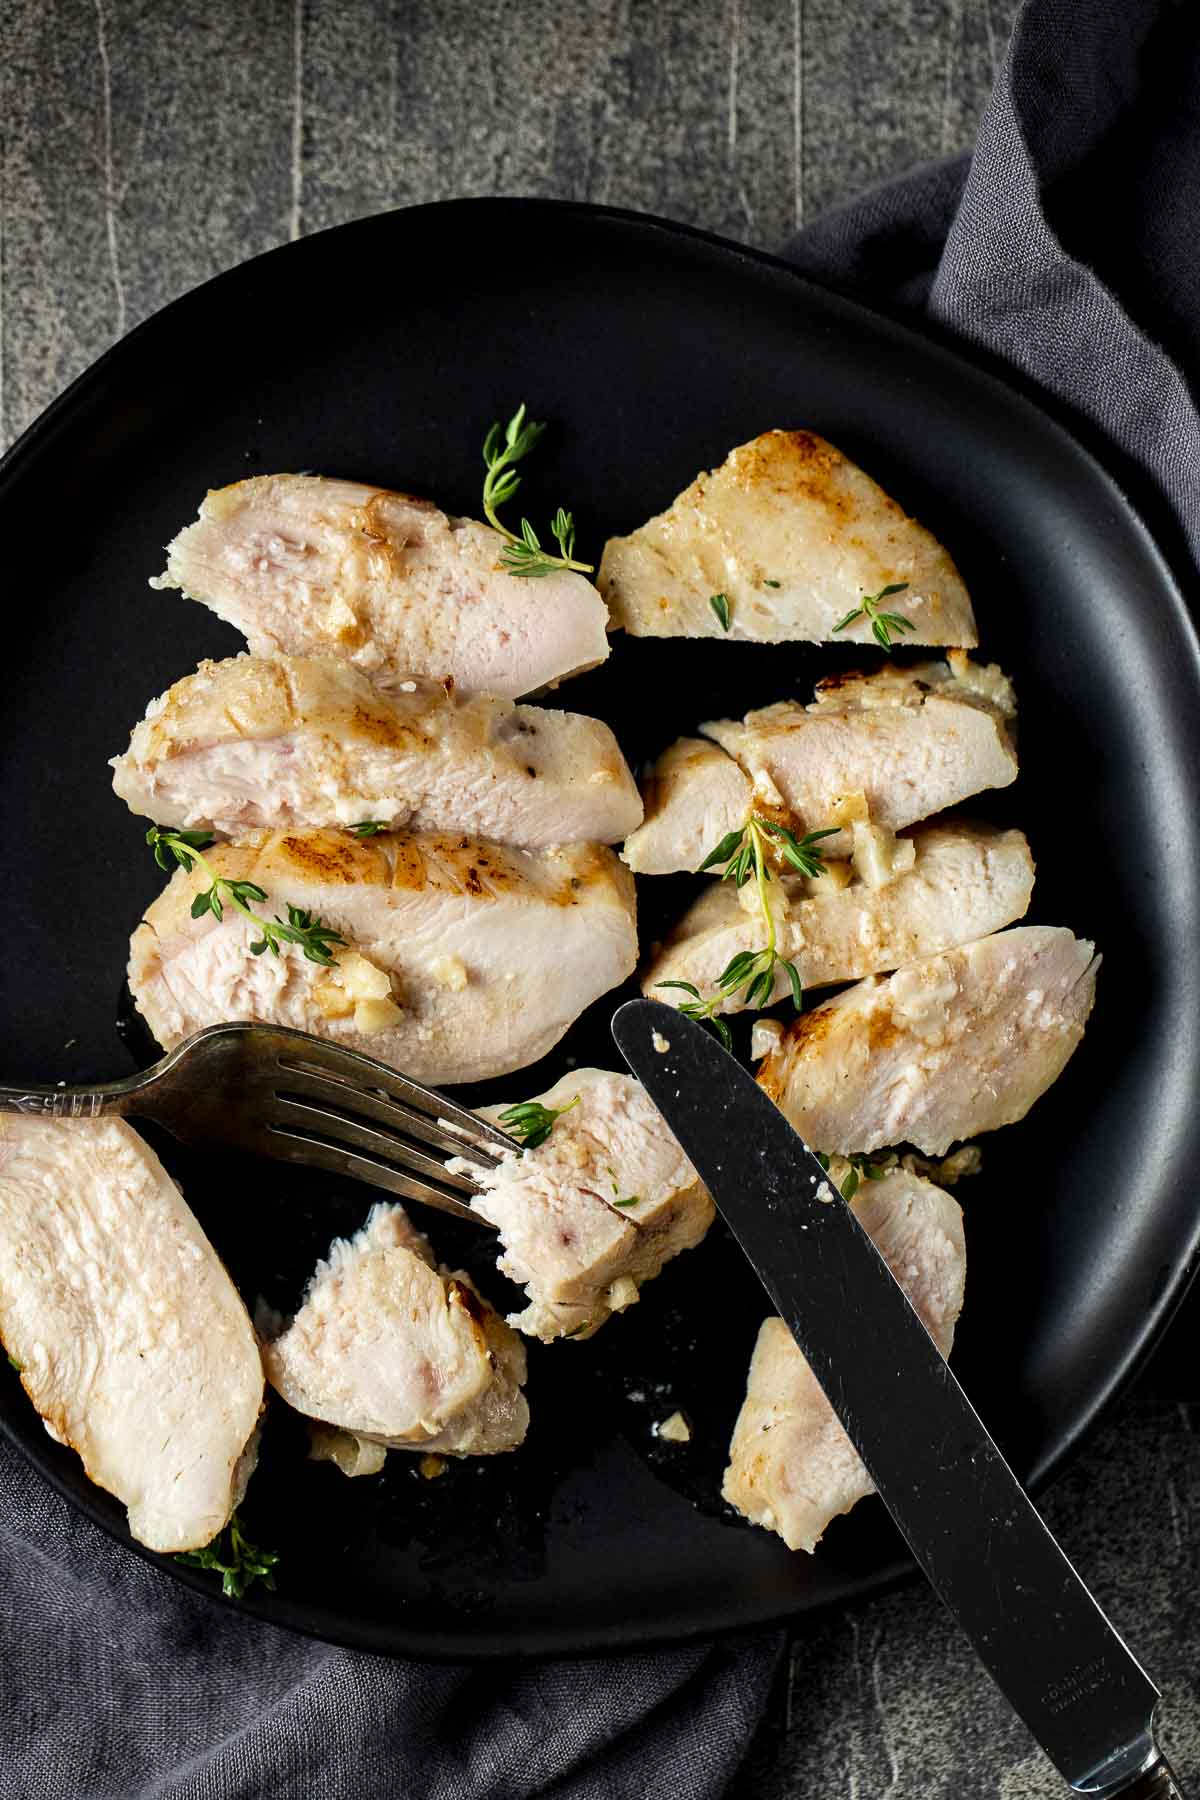 Overhead view of sliced chicken breast on a black plate with a fork.